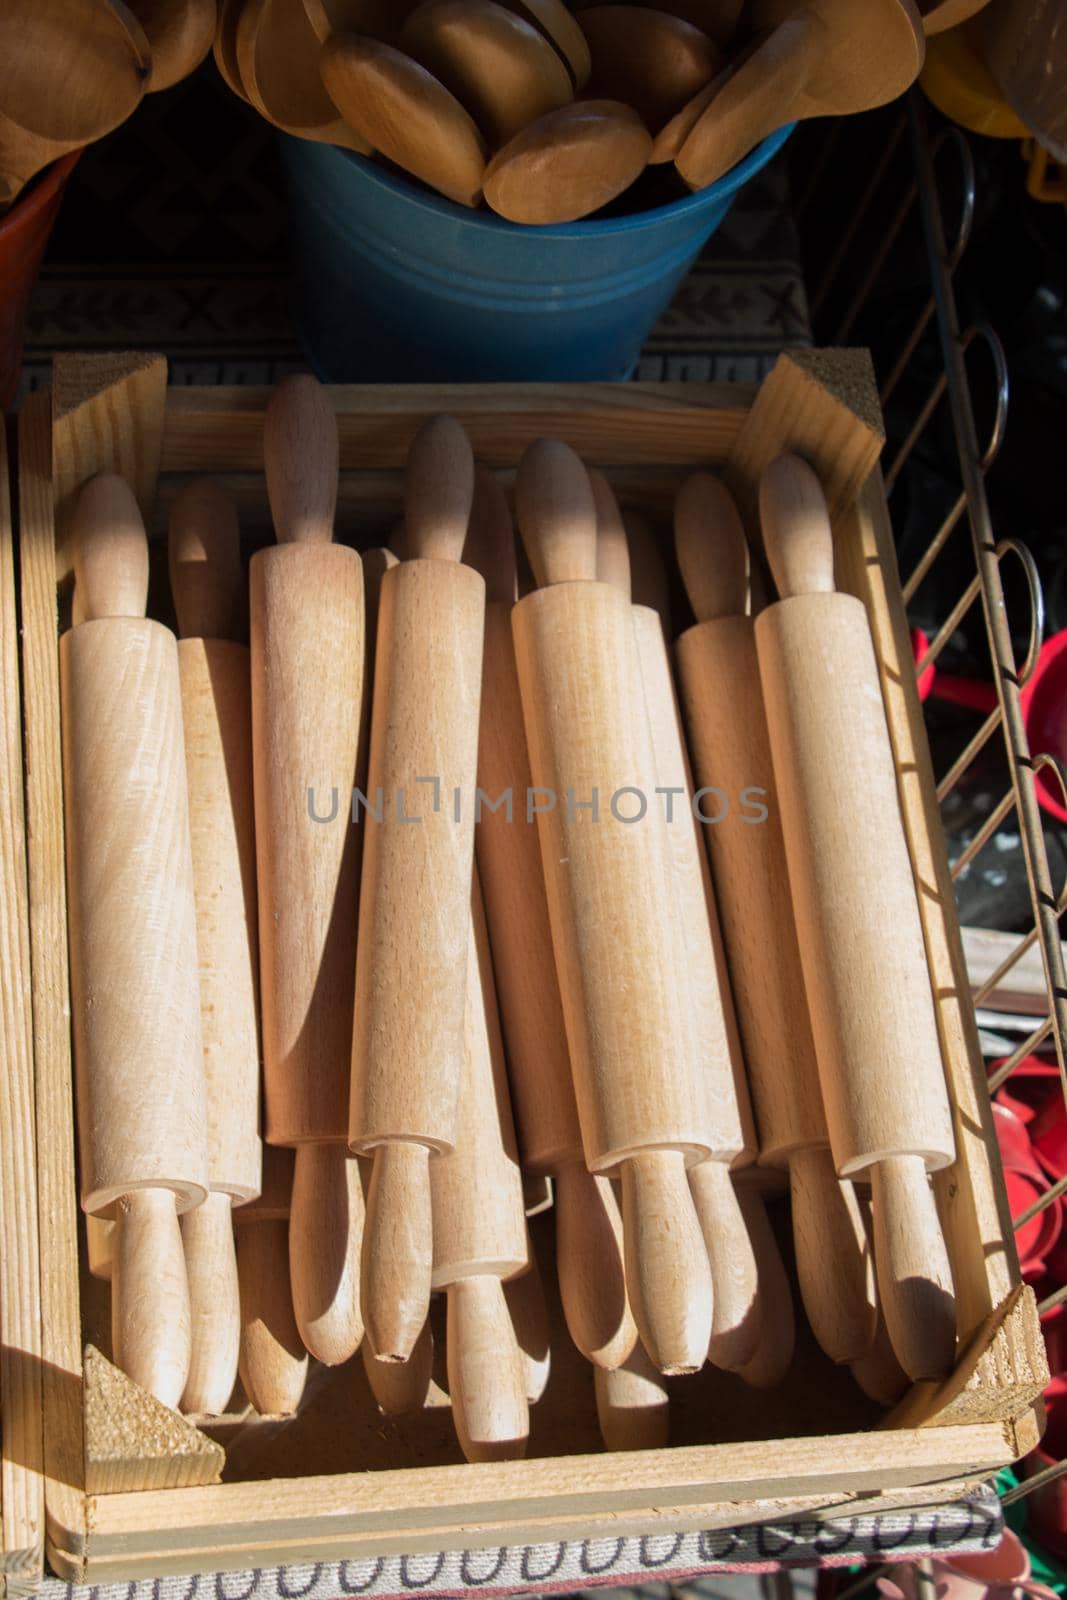 Set of rolling pins made of wood by berkay